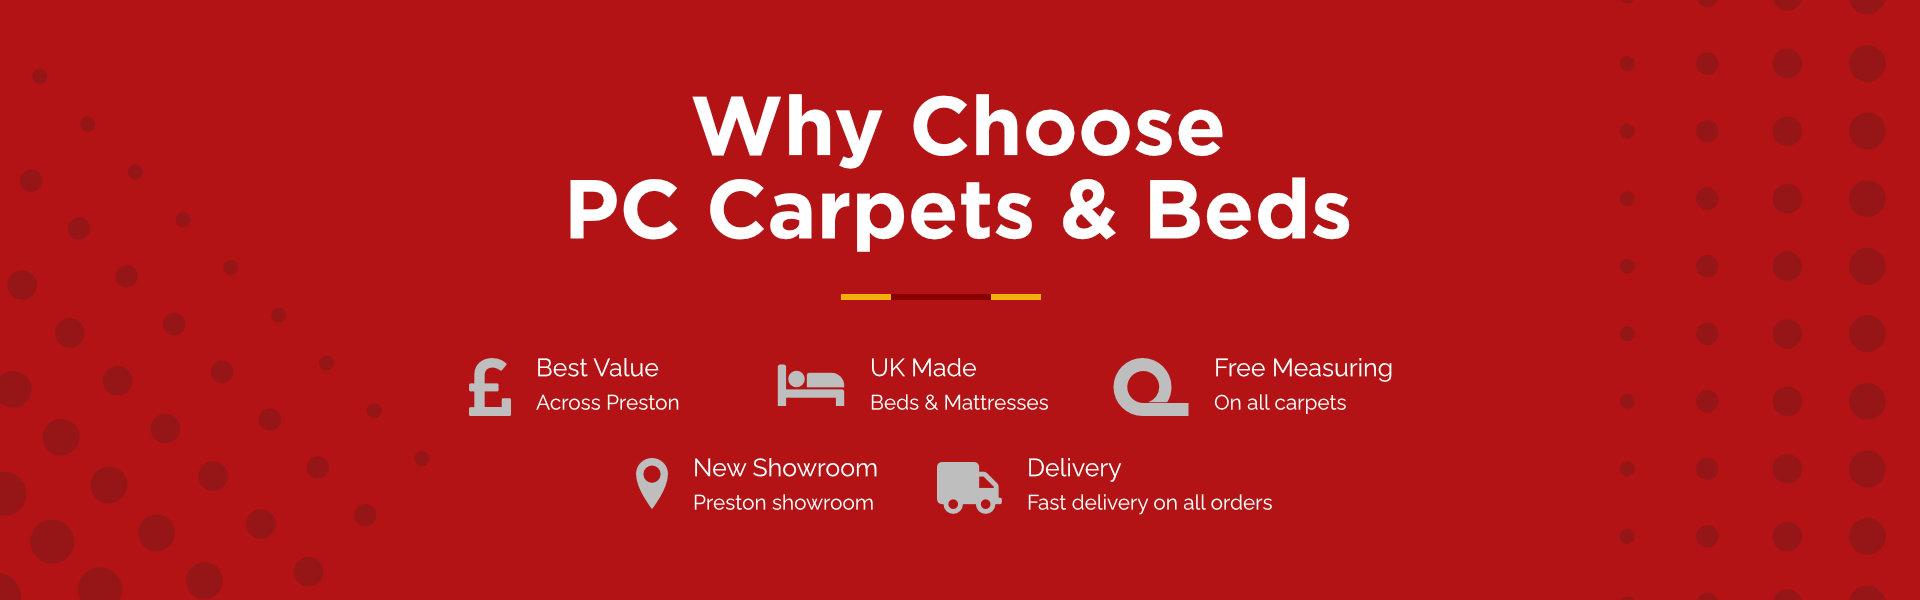 Why choose PC Carpets & Beds